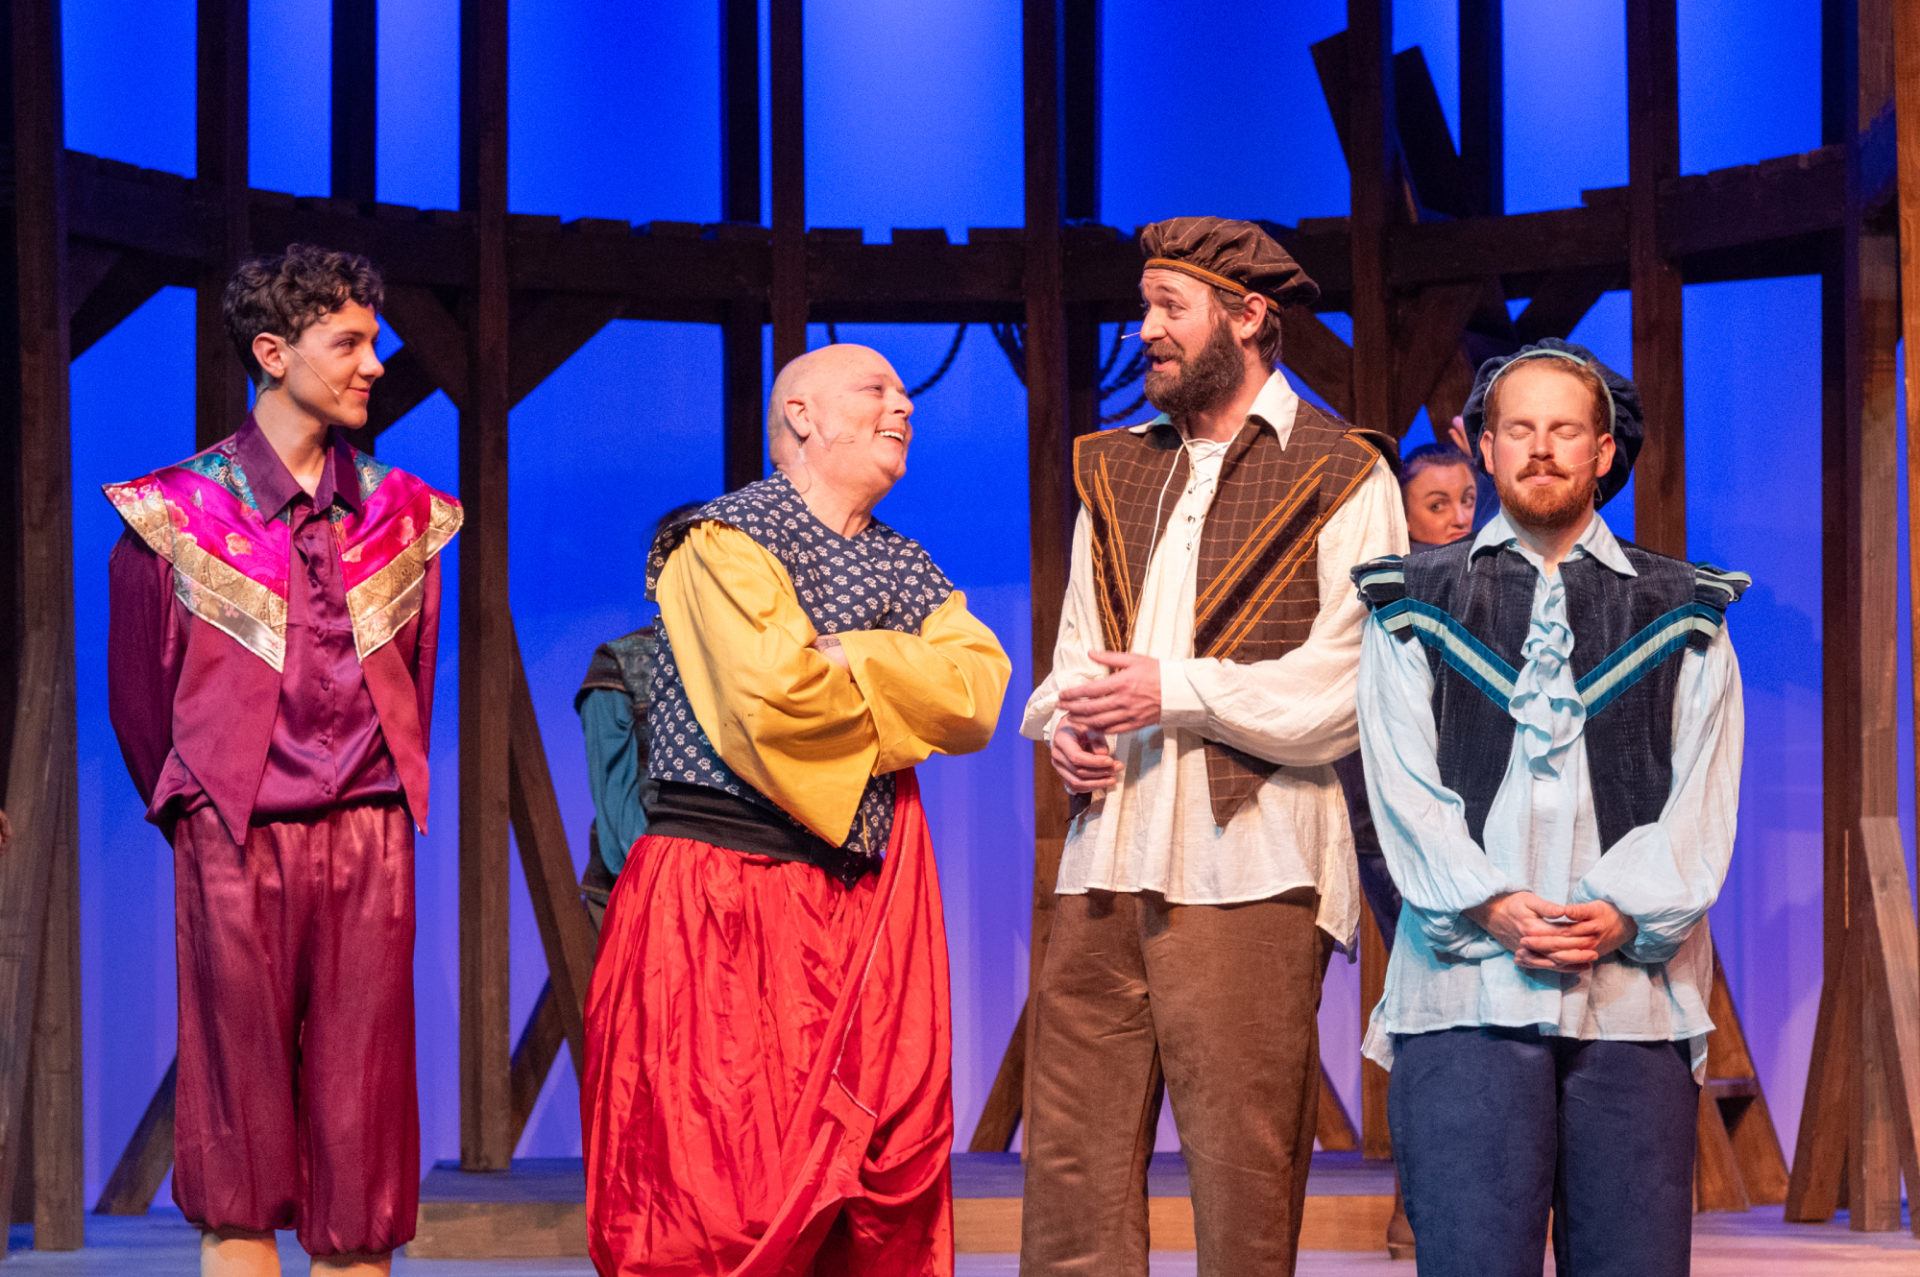 Four actors in Rosencrantz & Guildenstern are dead. They are four white men; the two on the left are looking toward the third man from the left, who looks back at them. The fourth man, on the right of the image, faces forward with his eyes closed. They are all wearing vaguely Shakespearean dress. There is a wooden structure behind them; the stage is lit blue. Actors are: Owen Henderson (The Player), David Dillman (Alfred), Anthony DeGregorio (Guldenstern), Douglas Malcolm (Rosencrantz)